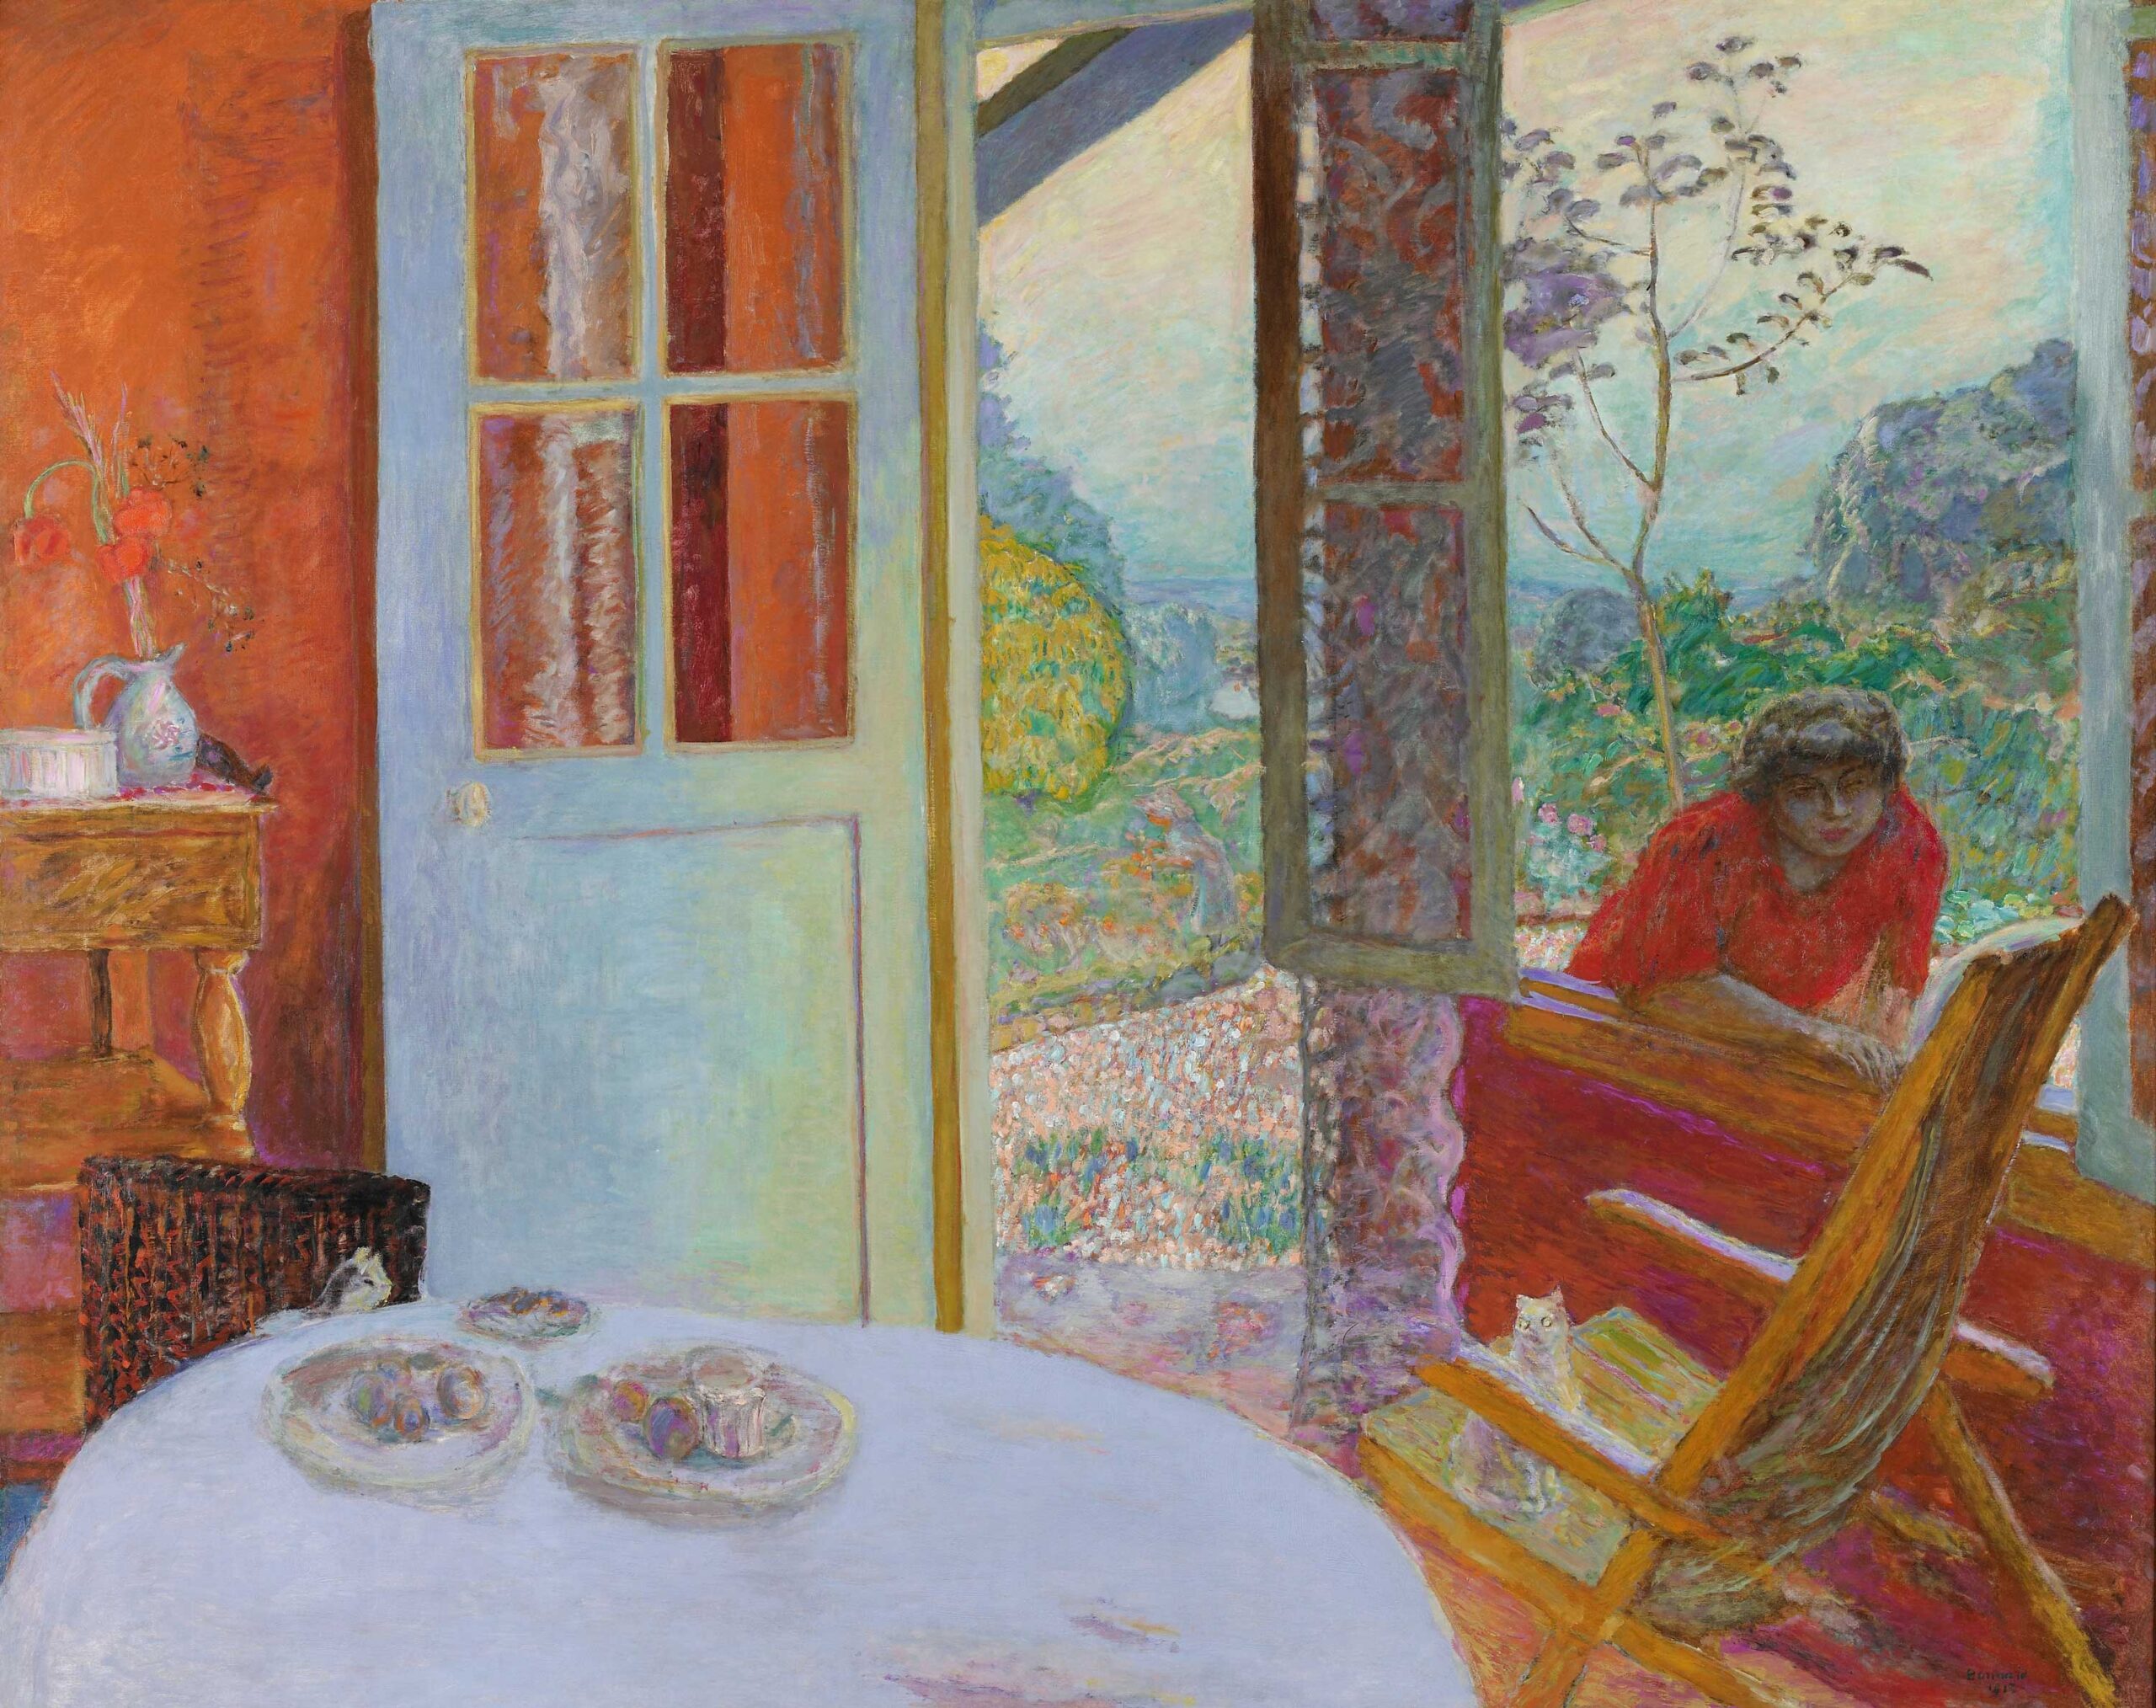 Pierre Bonnard, "Dining Room in the Country," 1913, oil on canvas. Lent by the Minneapolis Institute of Art, The John R. Van Derlip Fund © 2023 Artists Rights Society (ARS), New York 